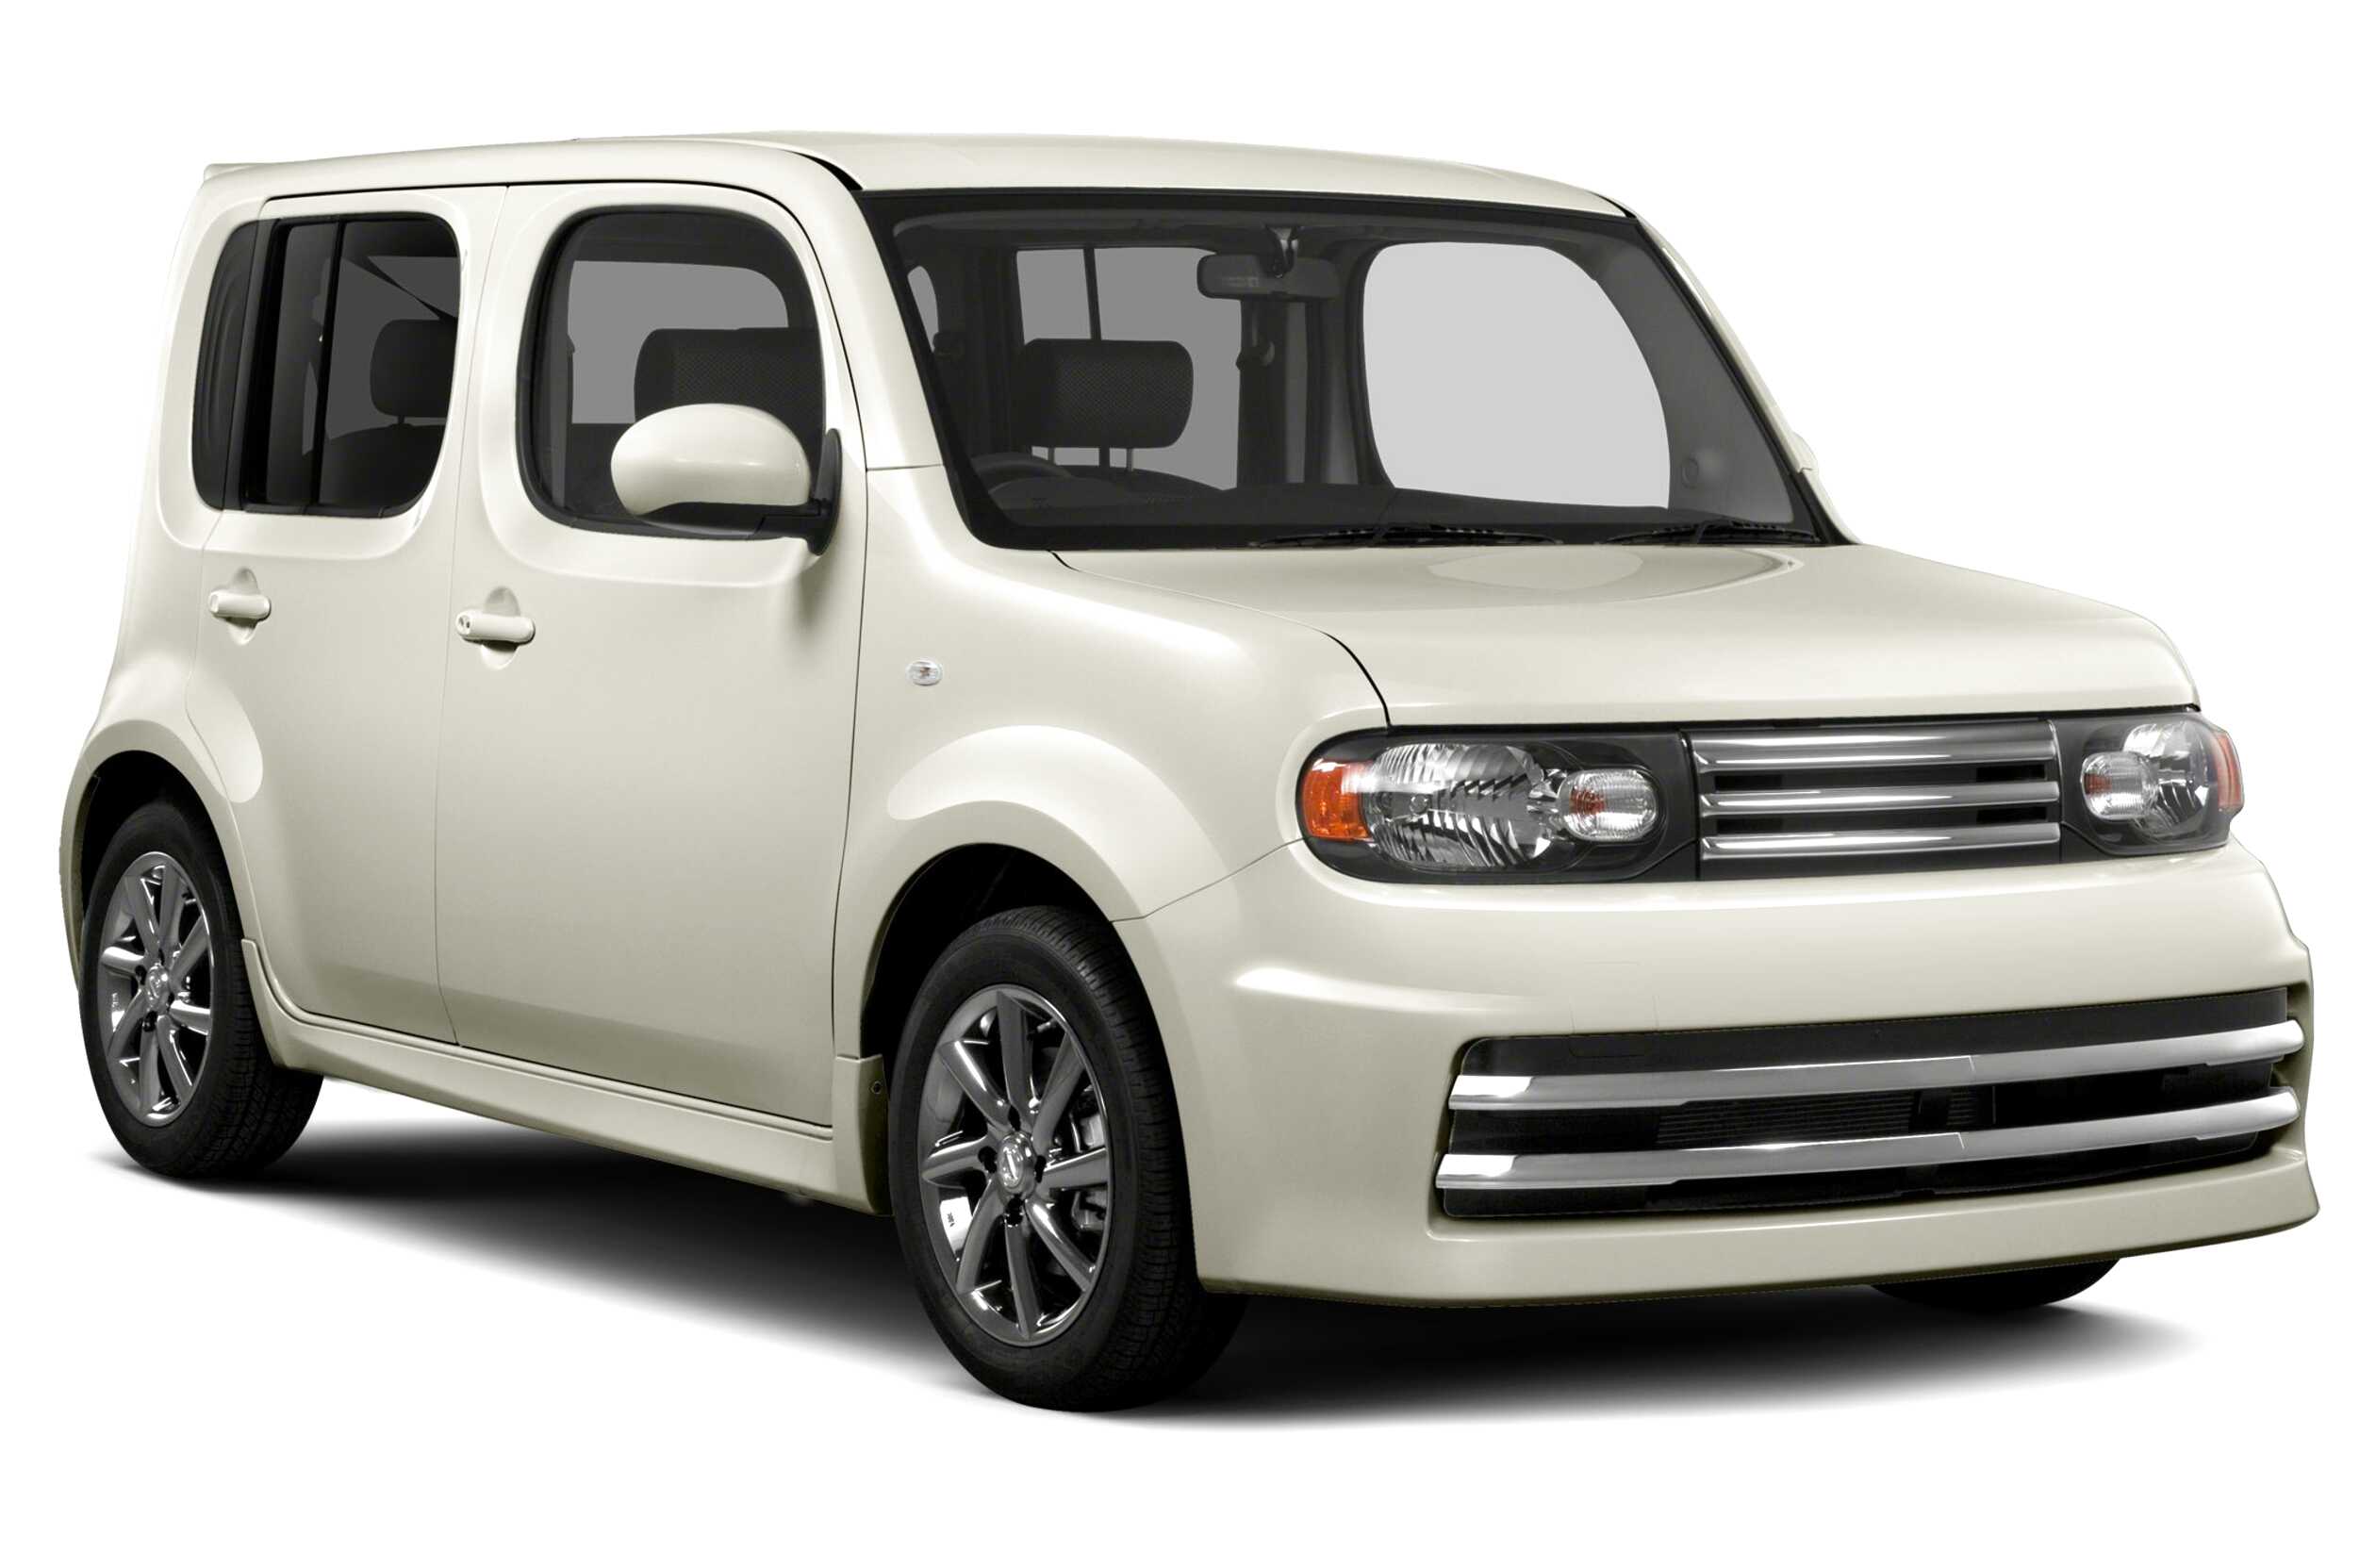 Nissan Cube for sale in UK 80 used Nissan Cubes